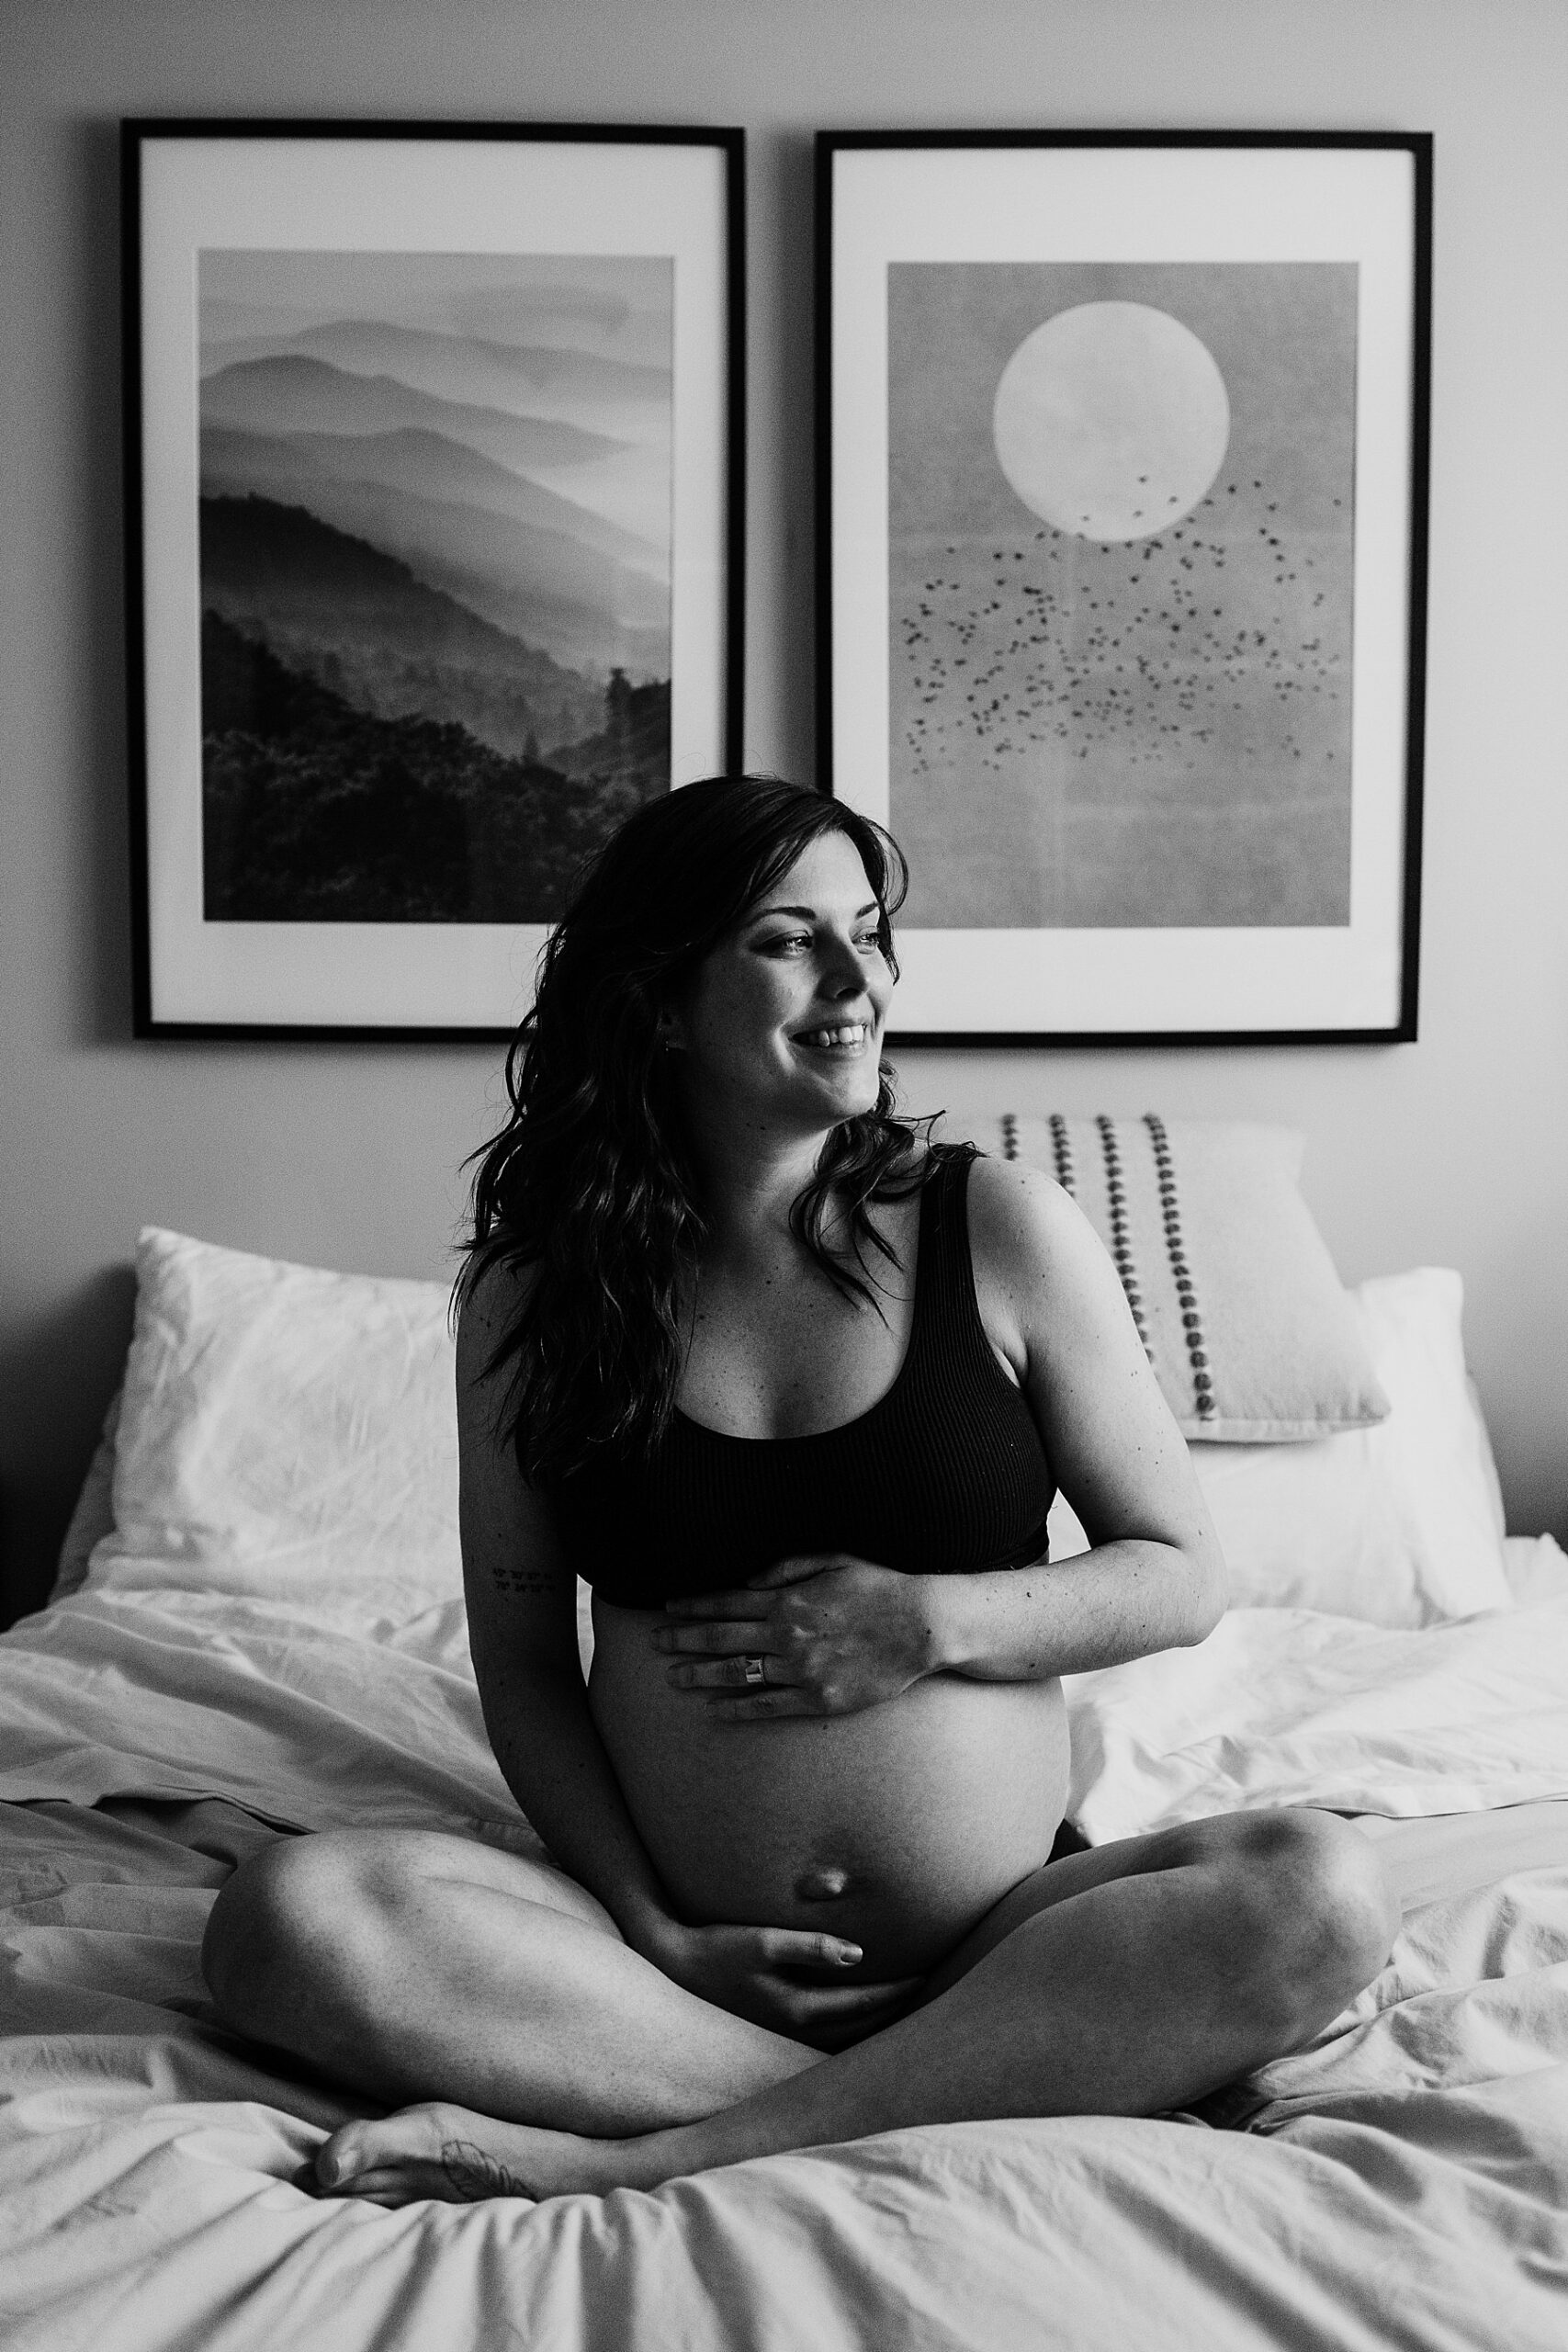 maternity photography toronto bump photoshoot showing heavily pregnant woman sitting cross legged on a bed in mississauga GTA ontario